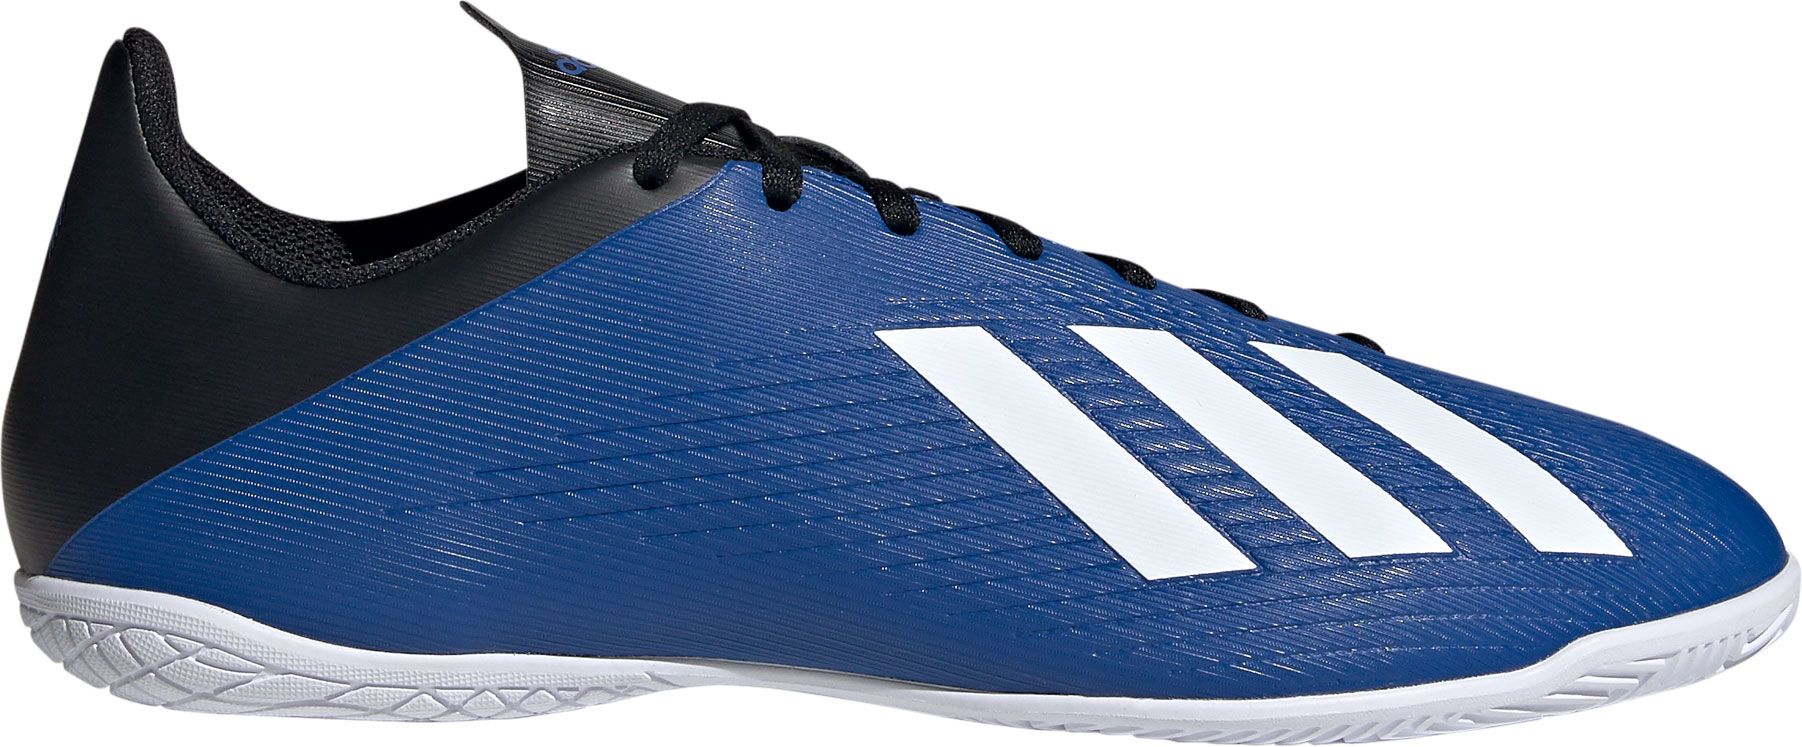 adidas x 19.4 indoor soccer shoes